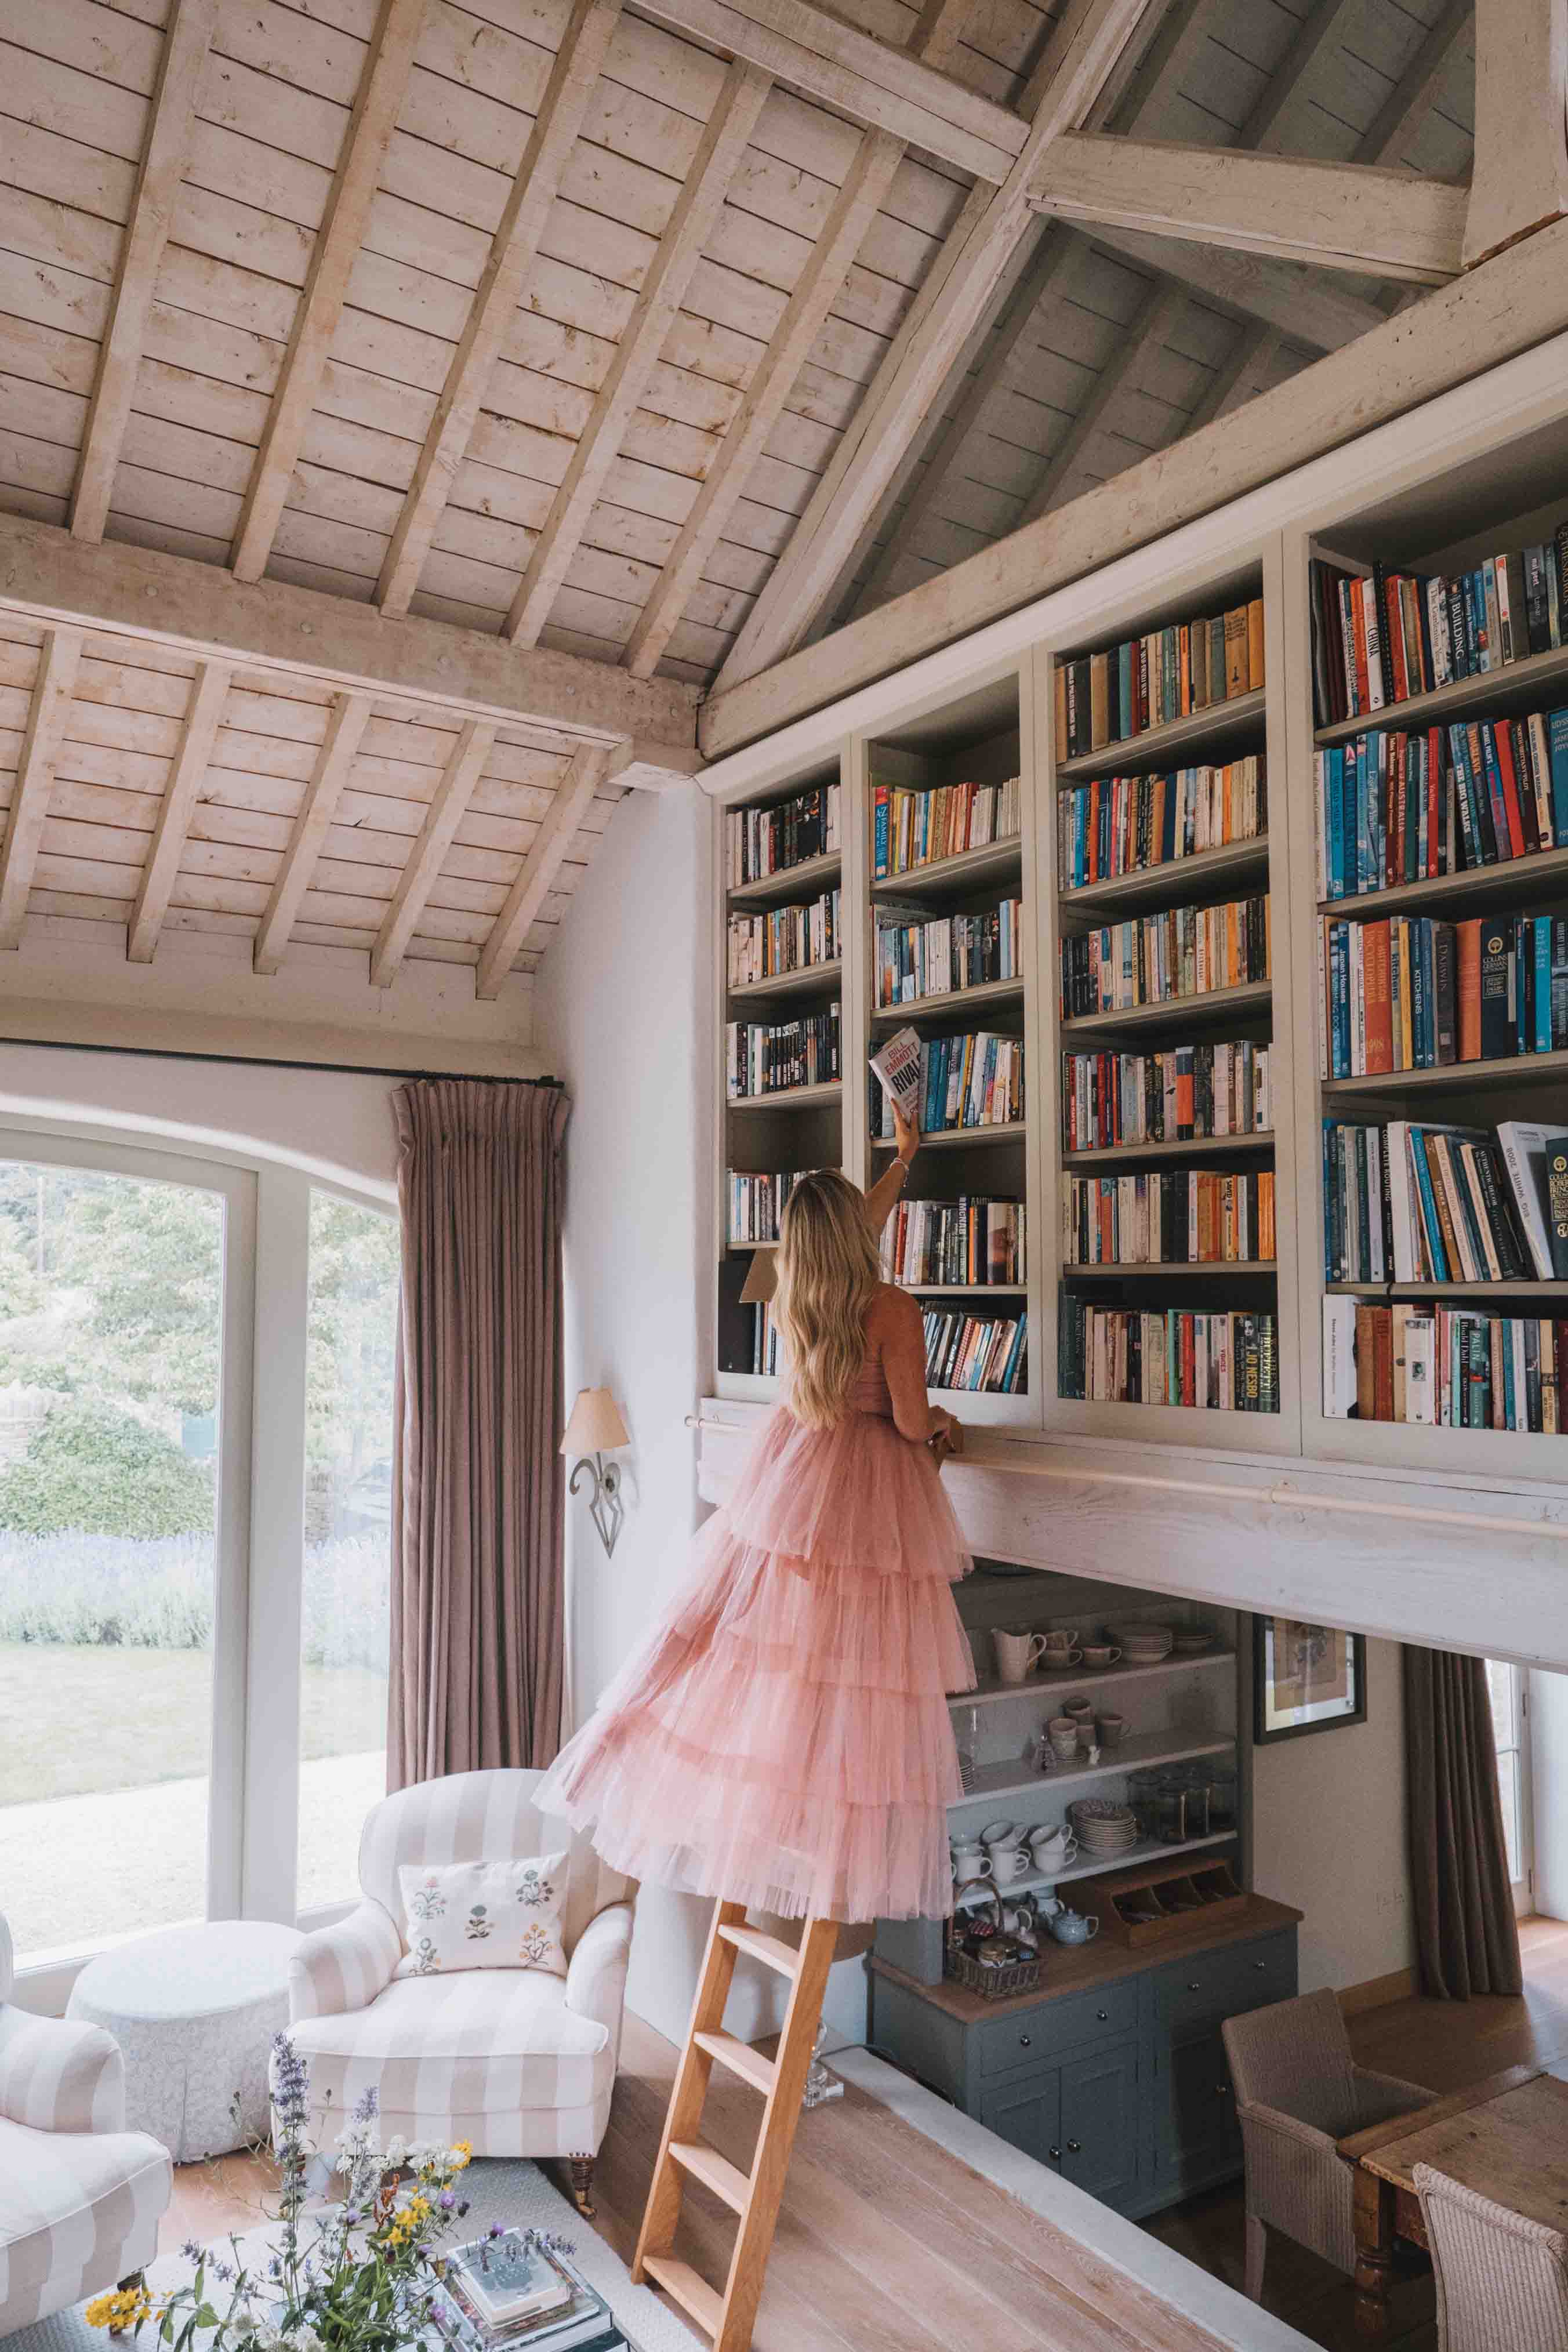 A lady in a flowing pink dress resting on a ladder to choose from a regal bookcase